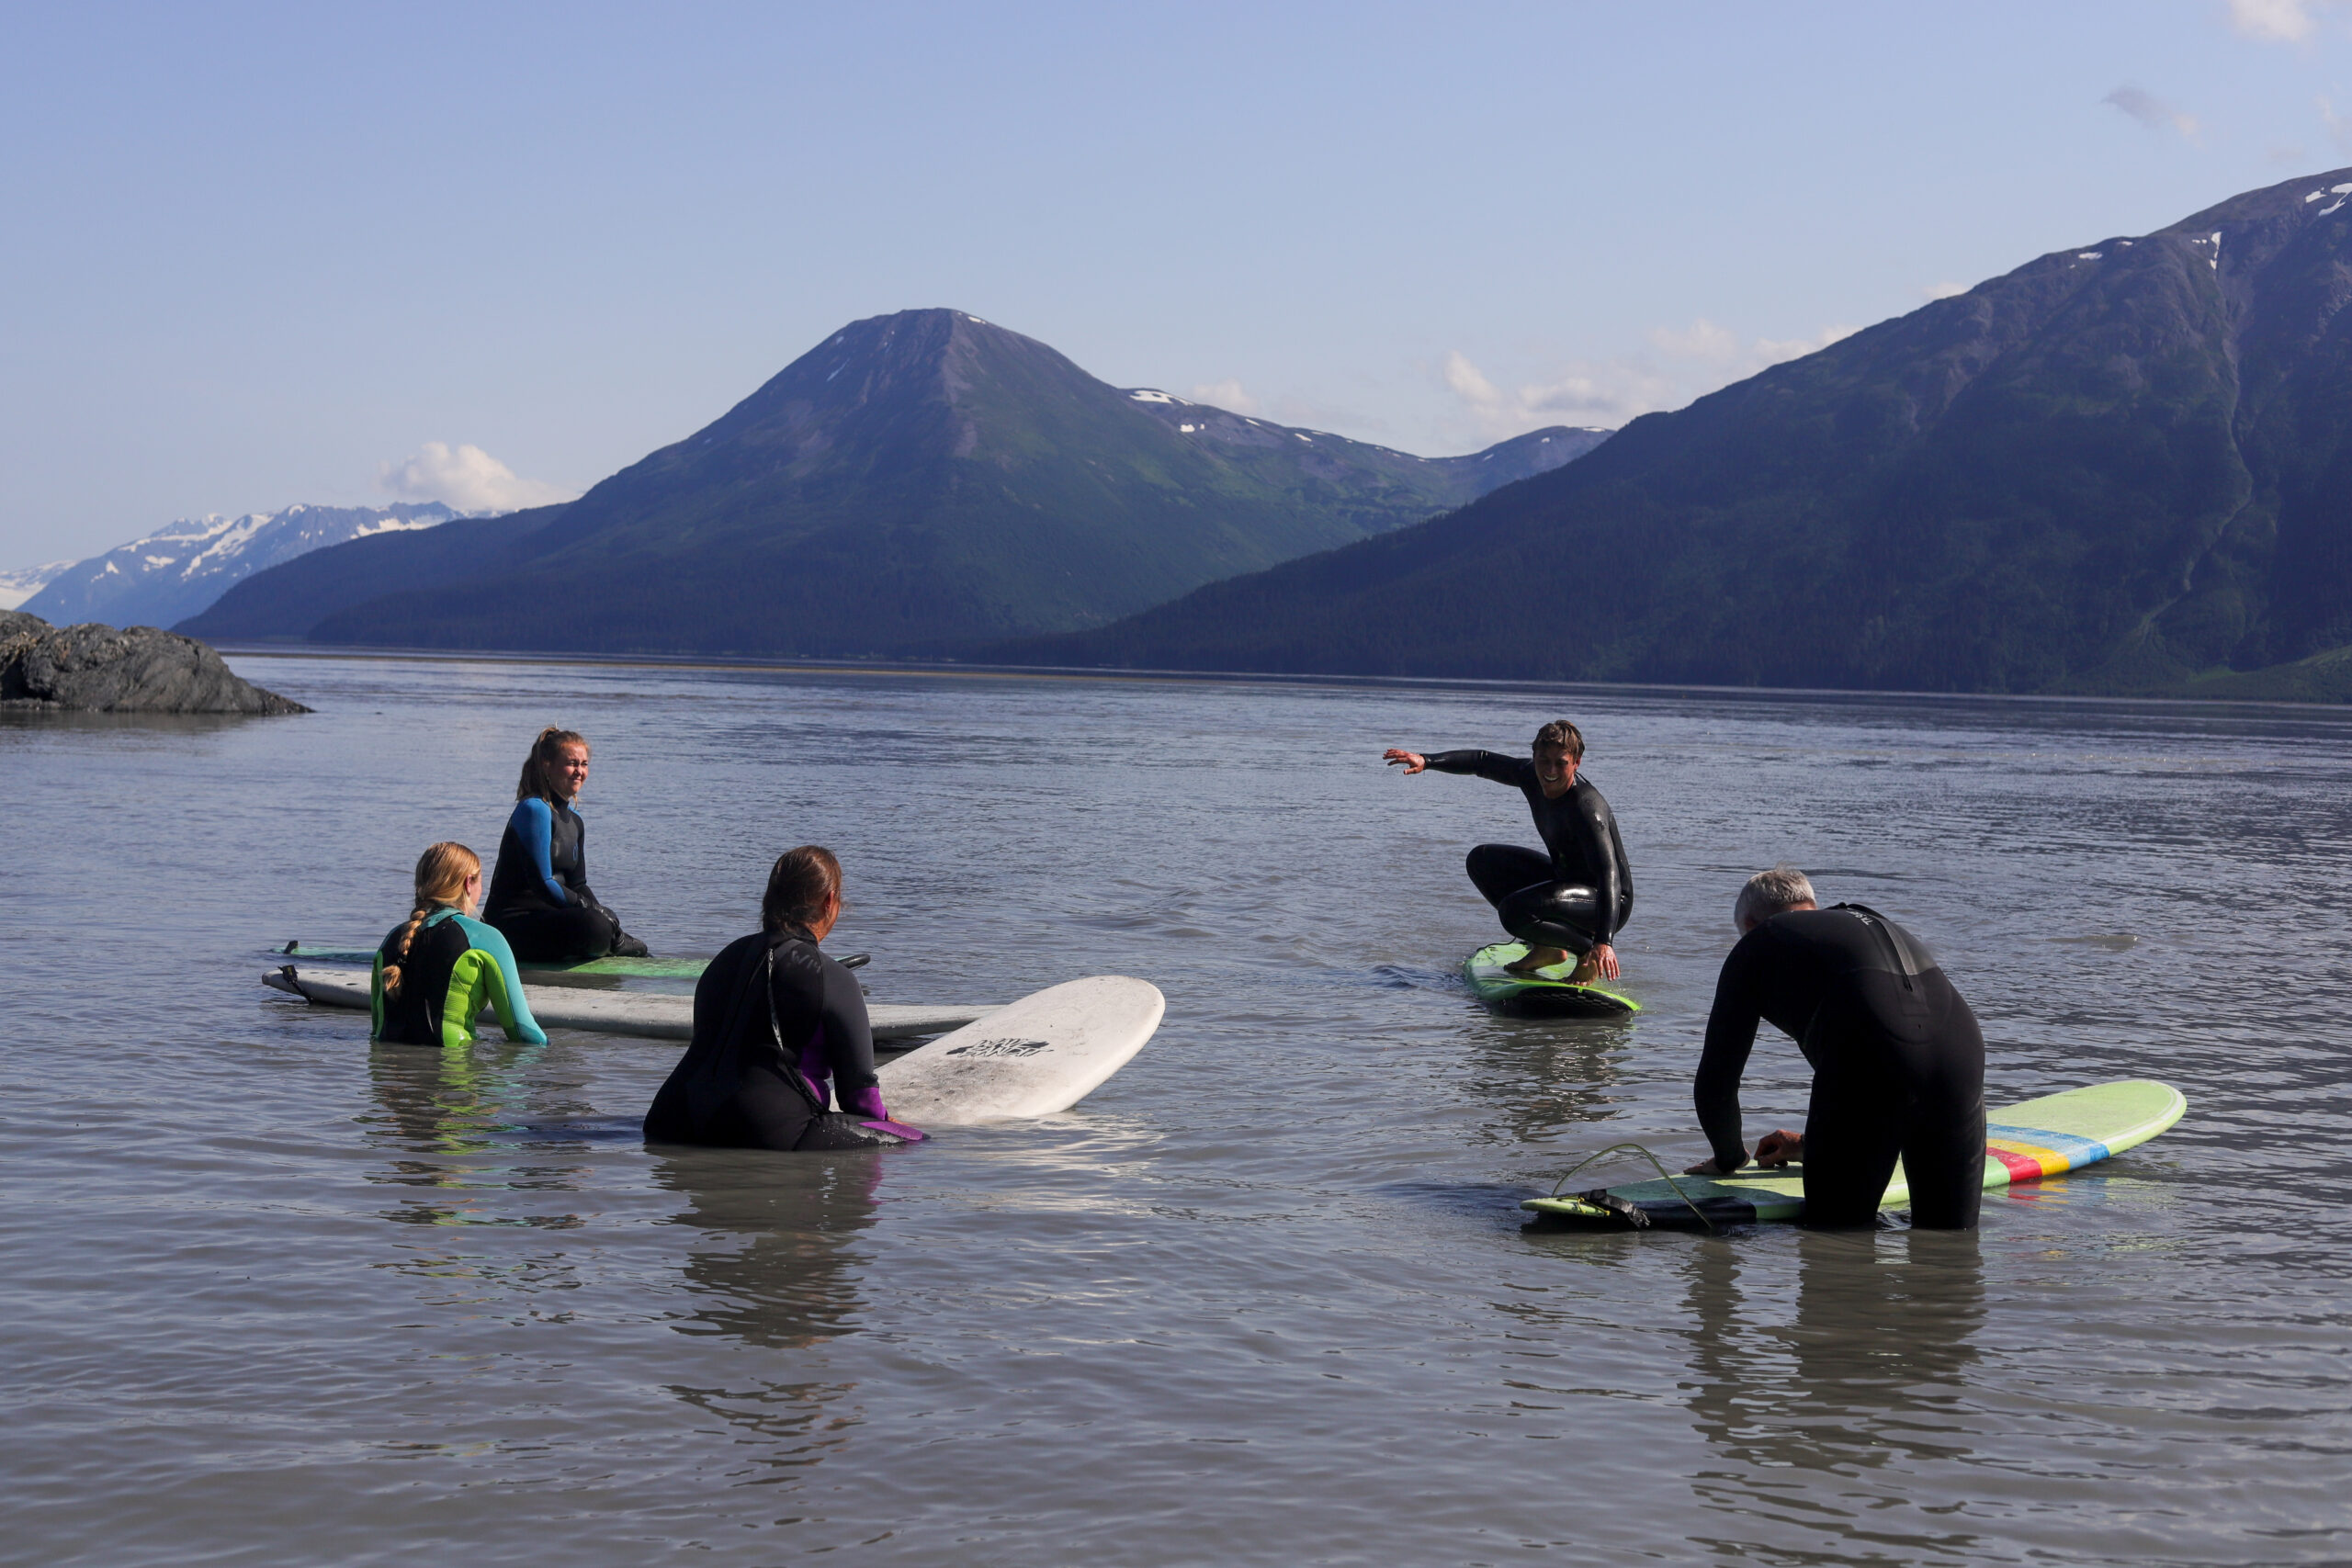 A group of people stand in shallow water with surfboards.